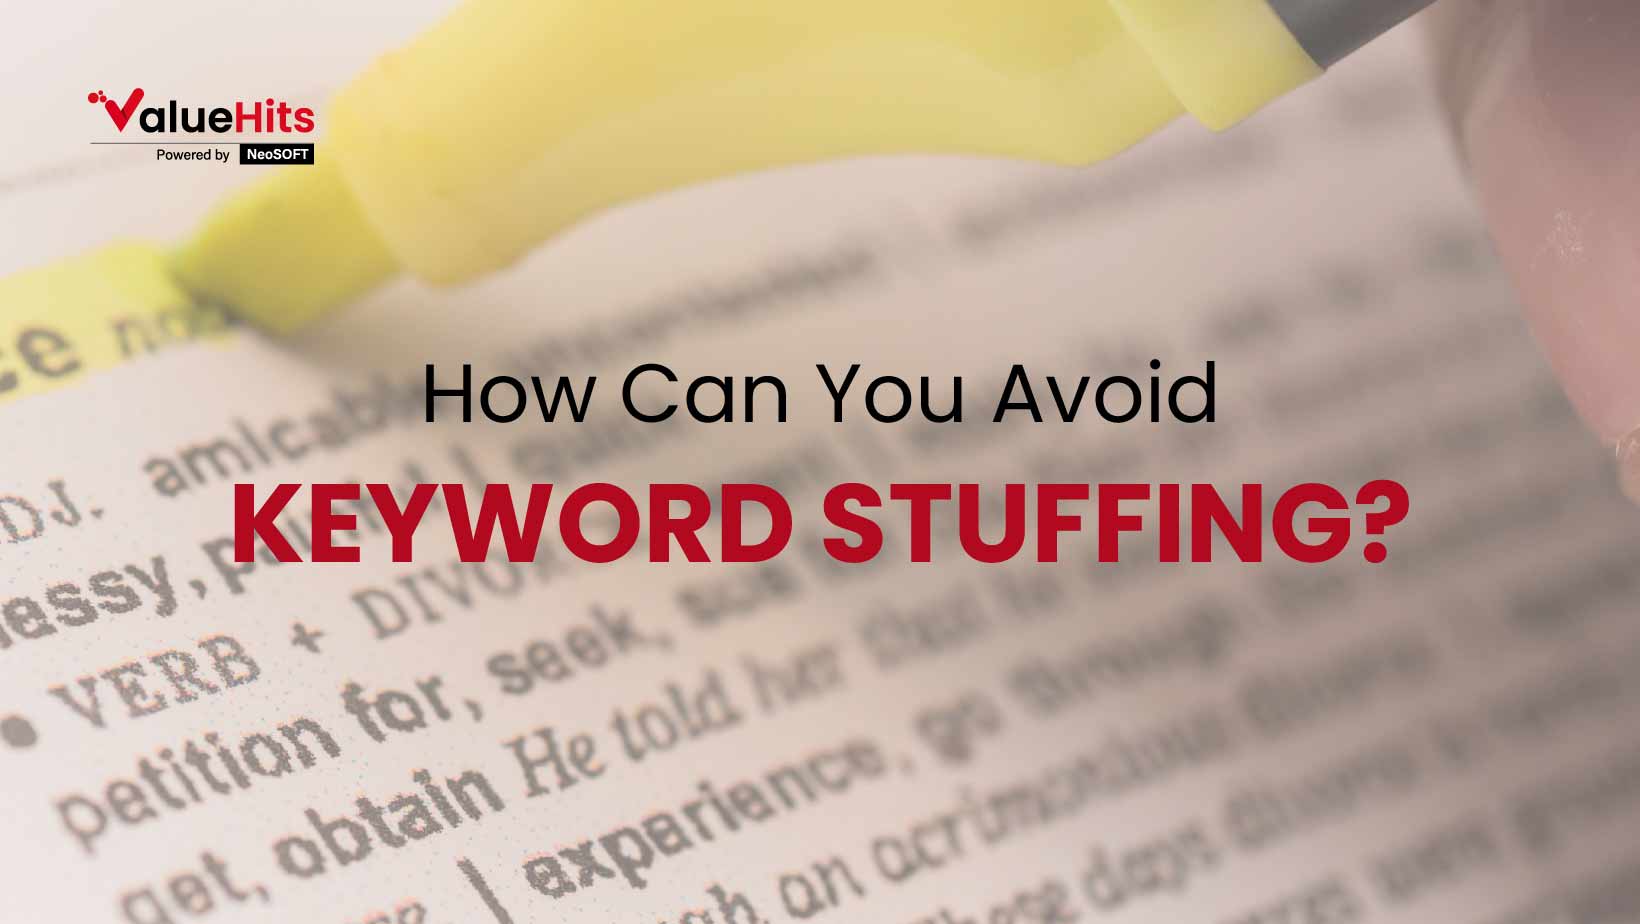 How Can You Avoid Keyword Stuffing